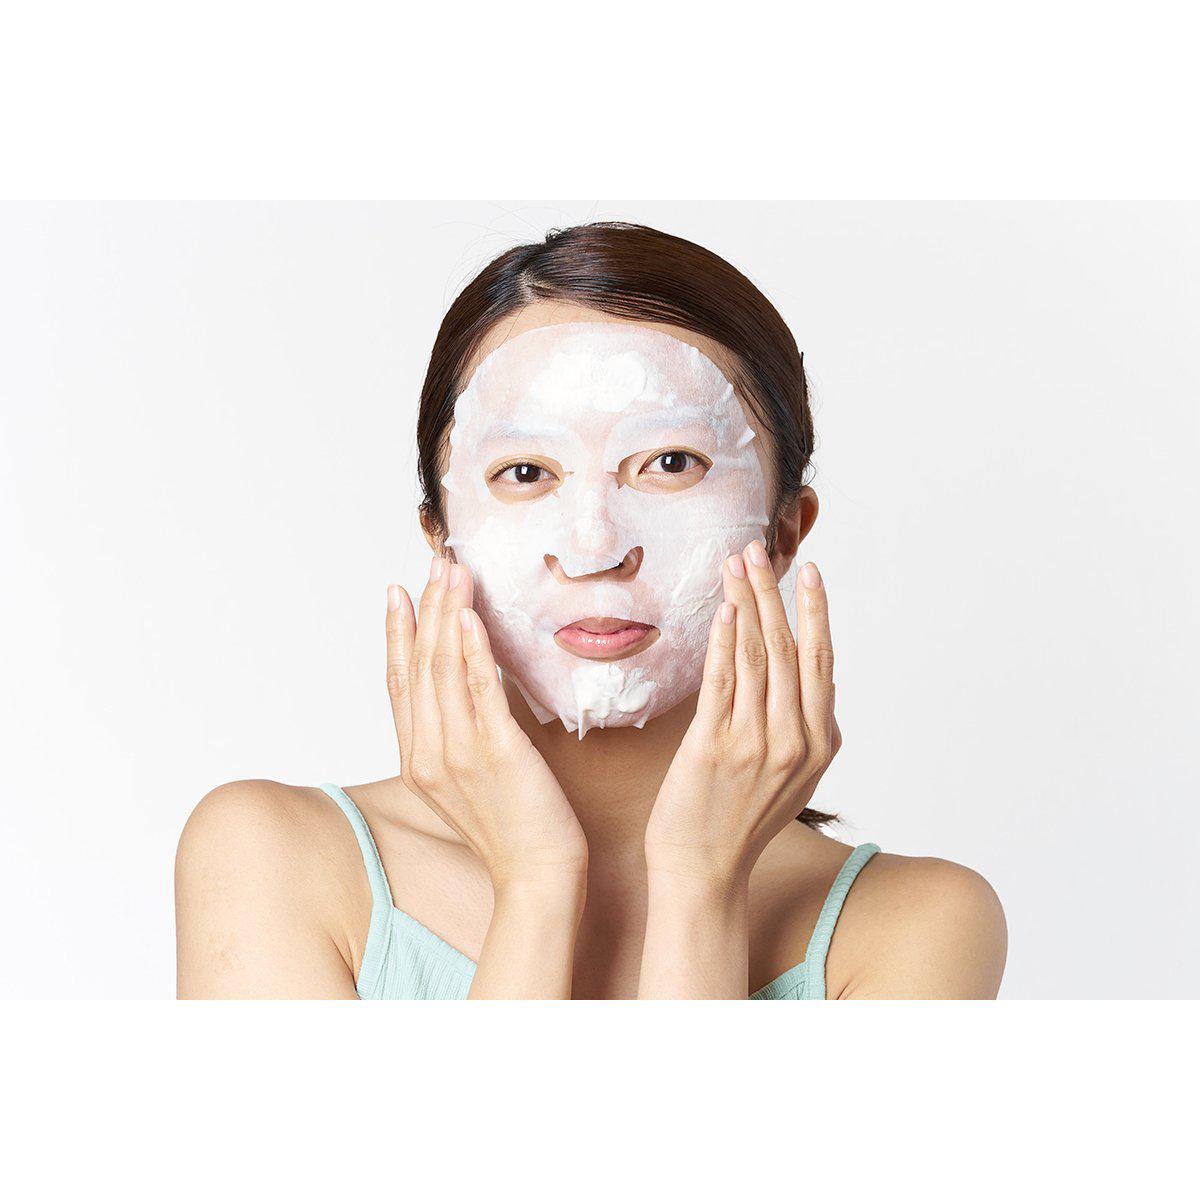 Rohto 50 No Megumi Aging Care Beauty Oil Face Mask 30 Sheets